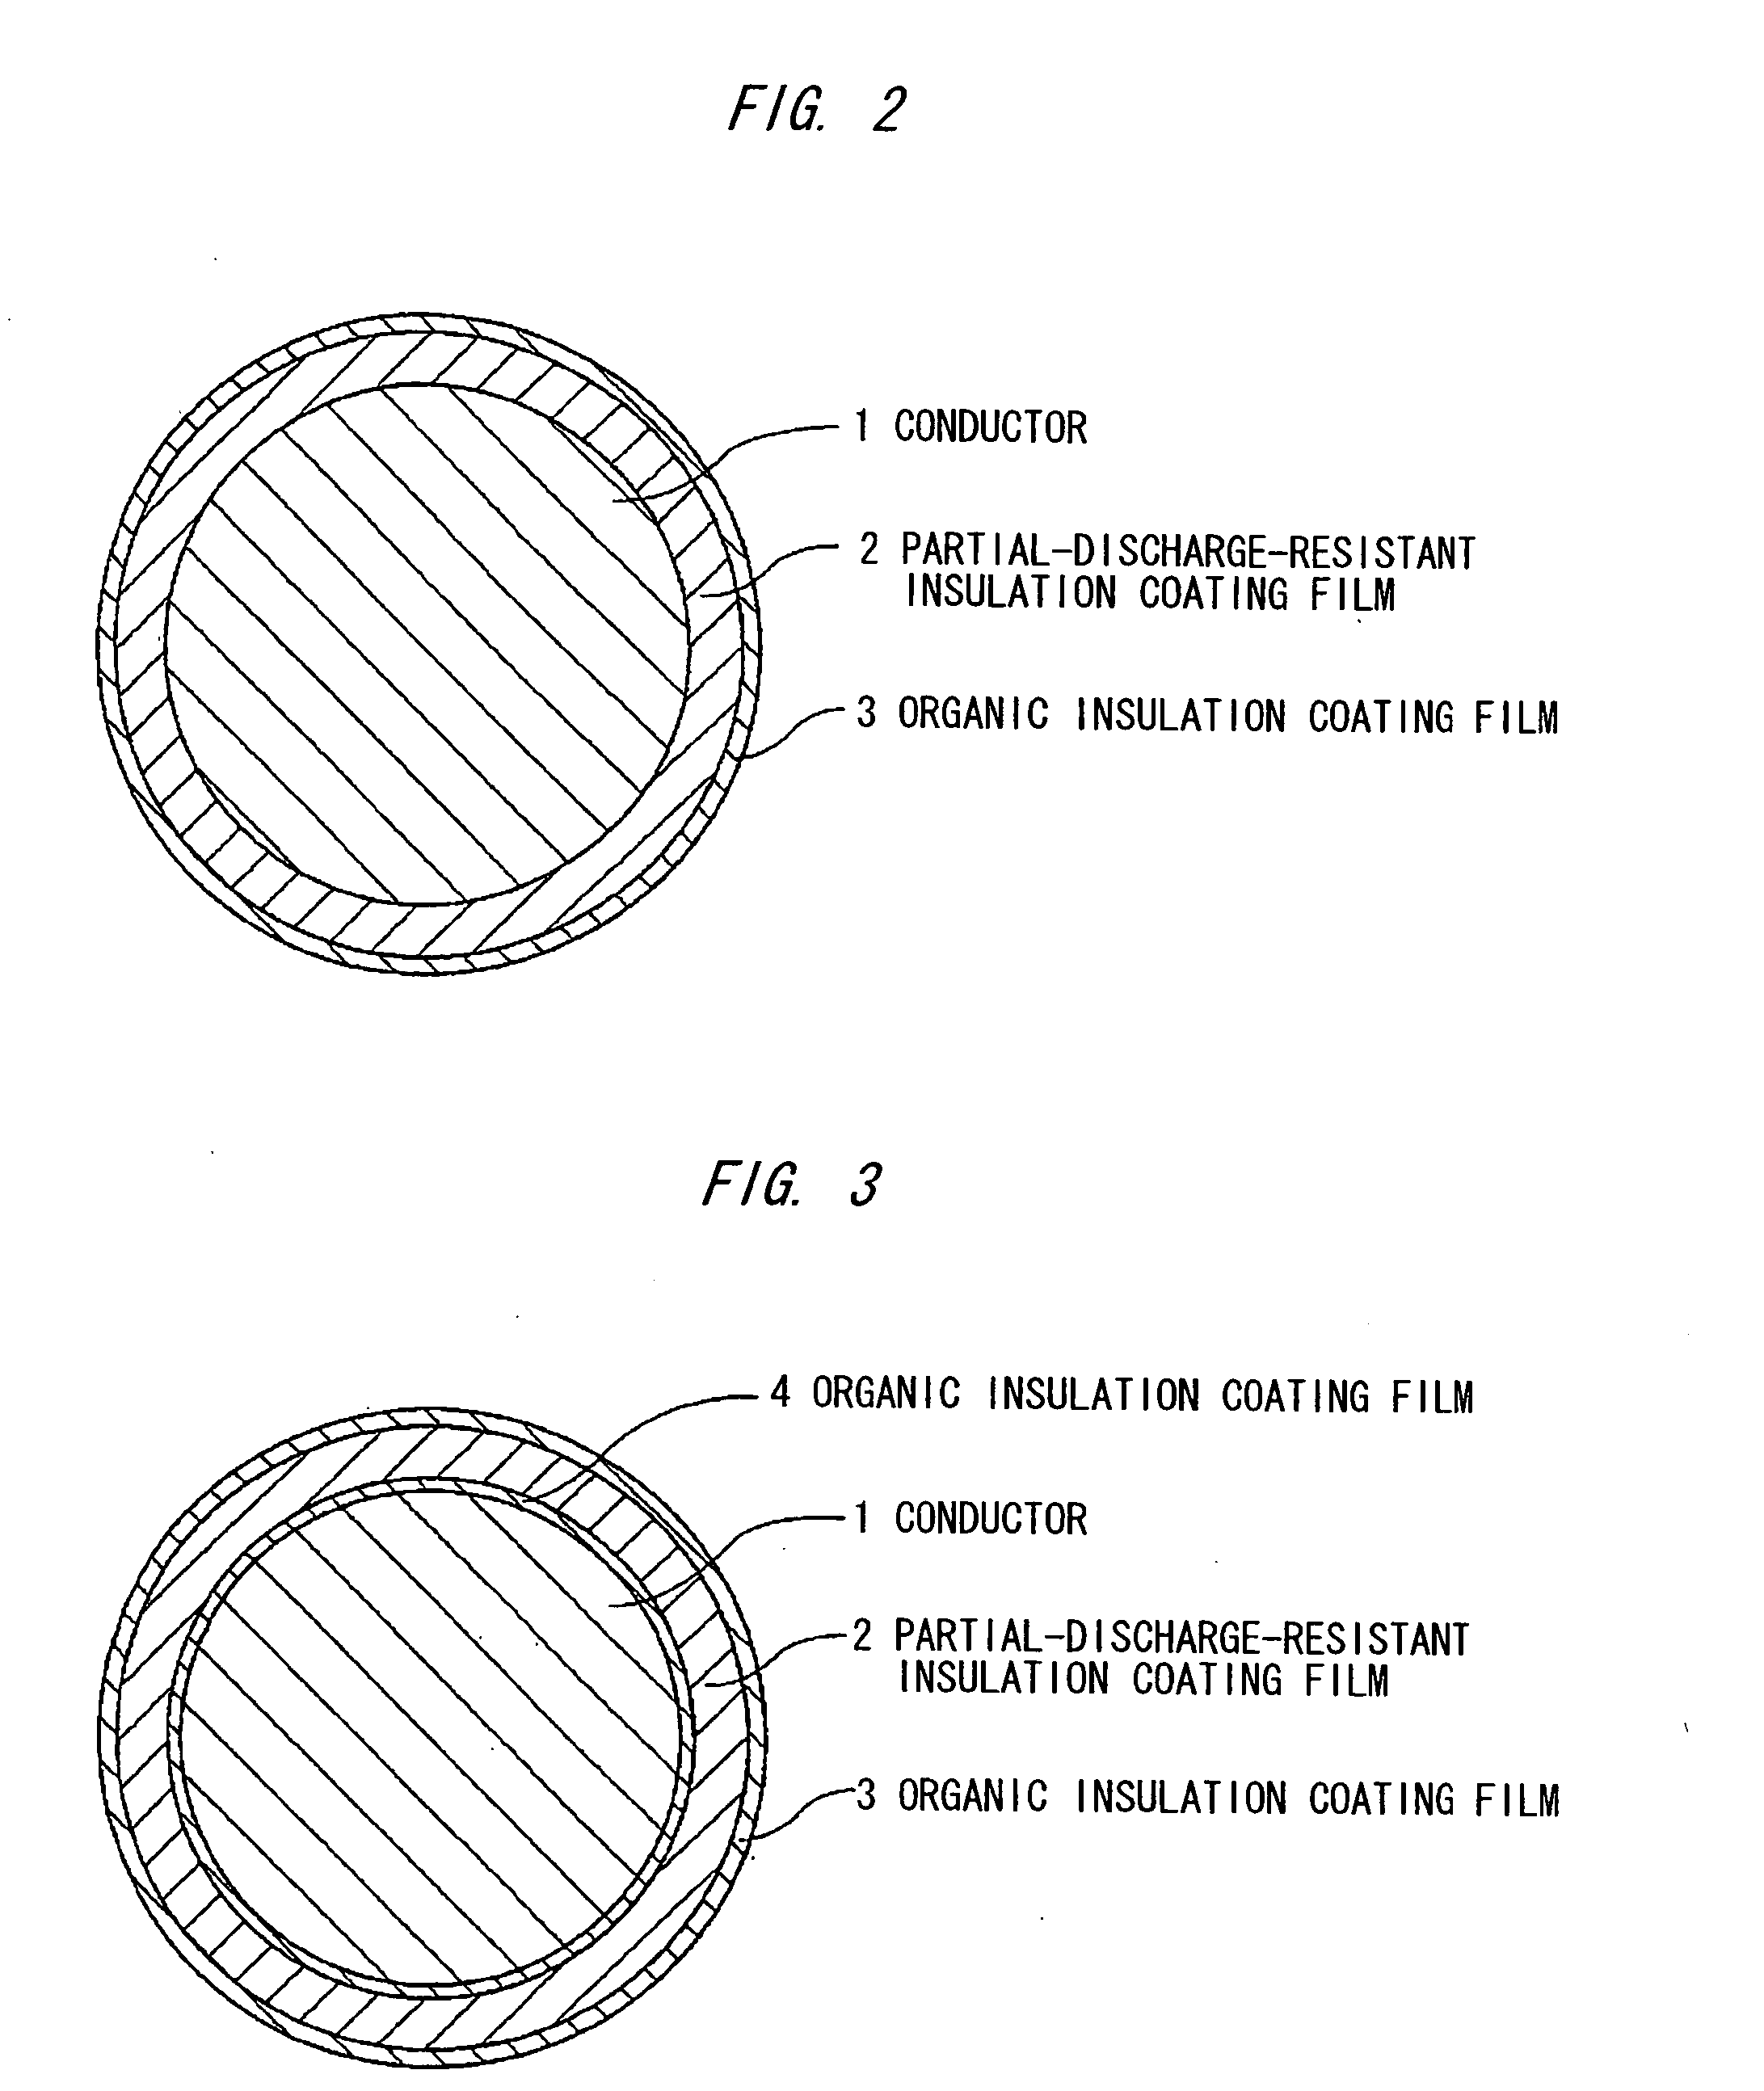 Partial-discharge-resistant insulating varnish, insulated wire and method of making the same